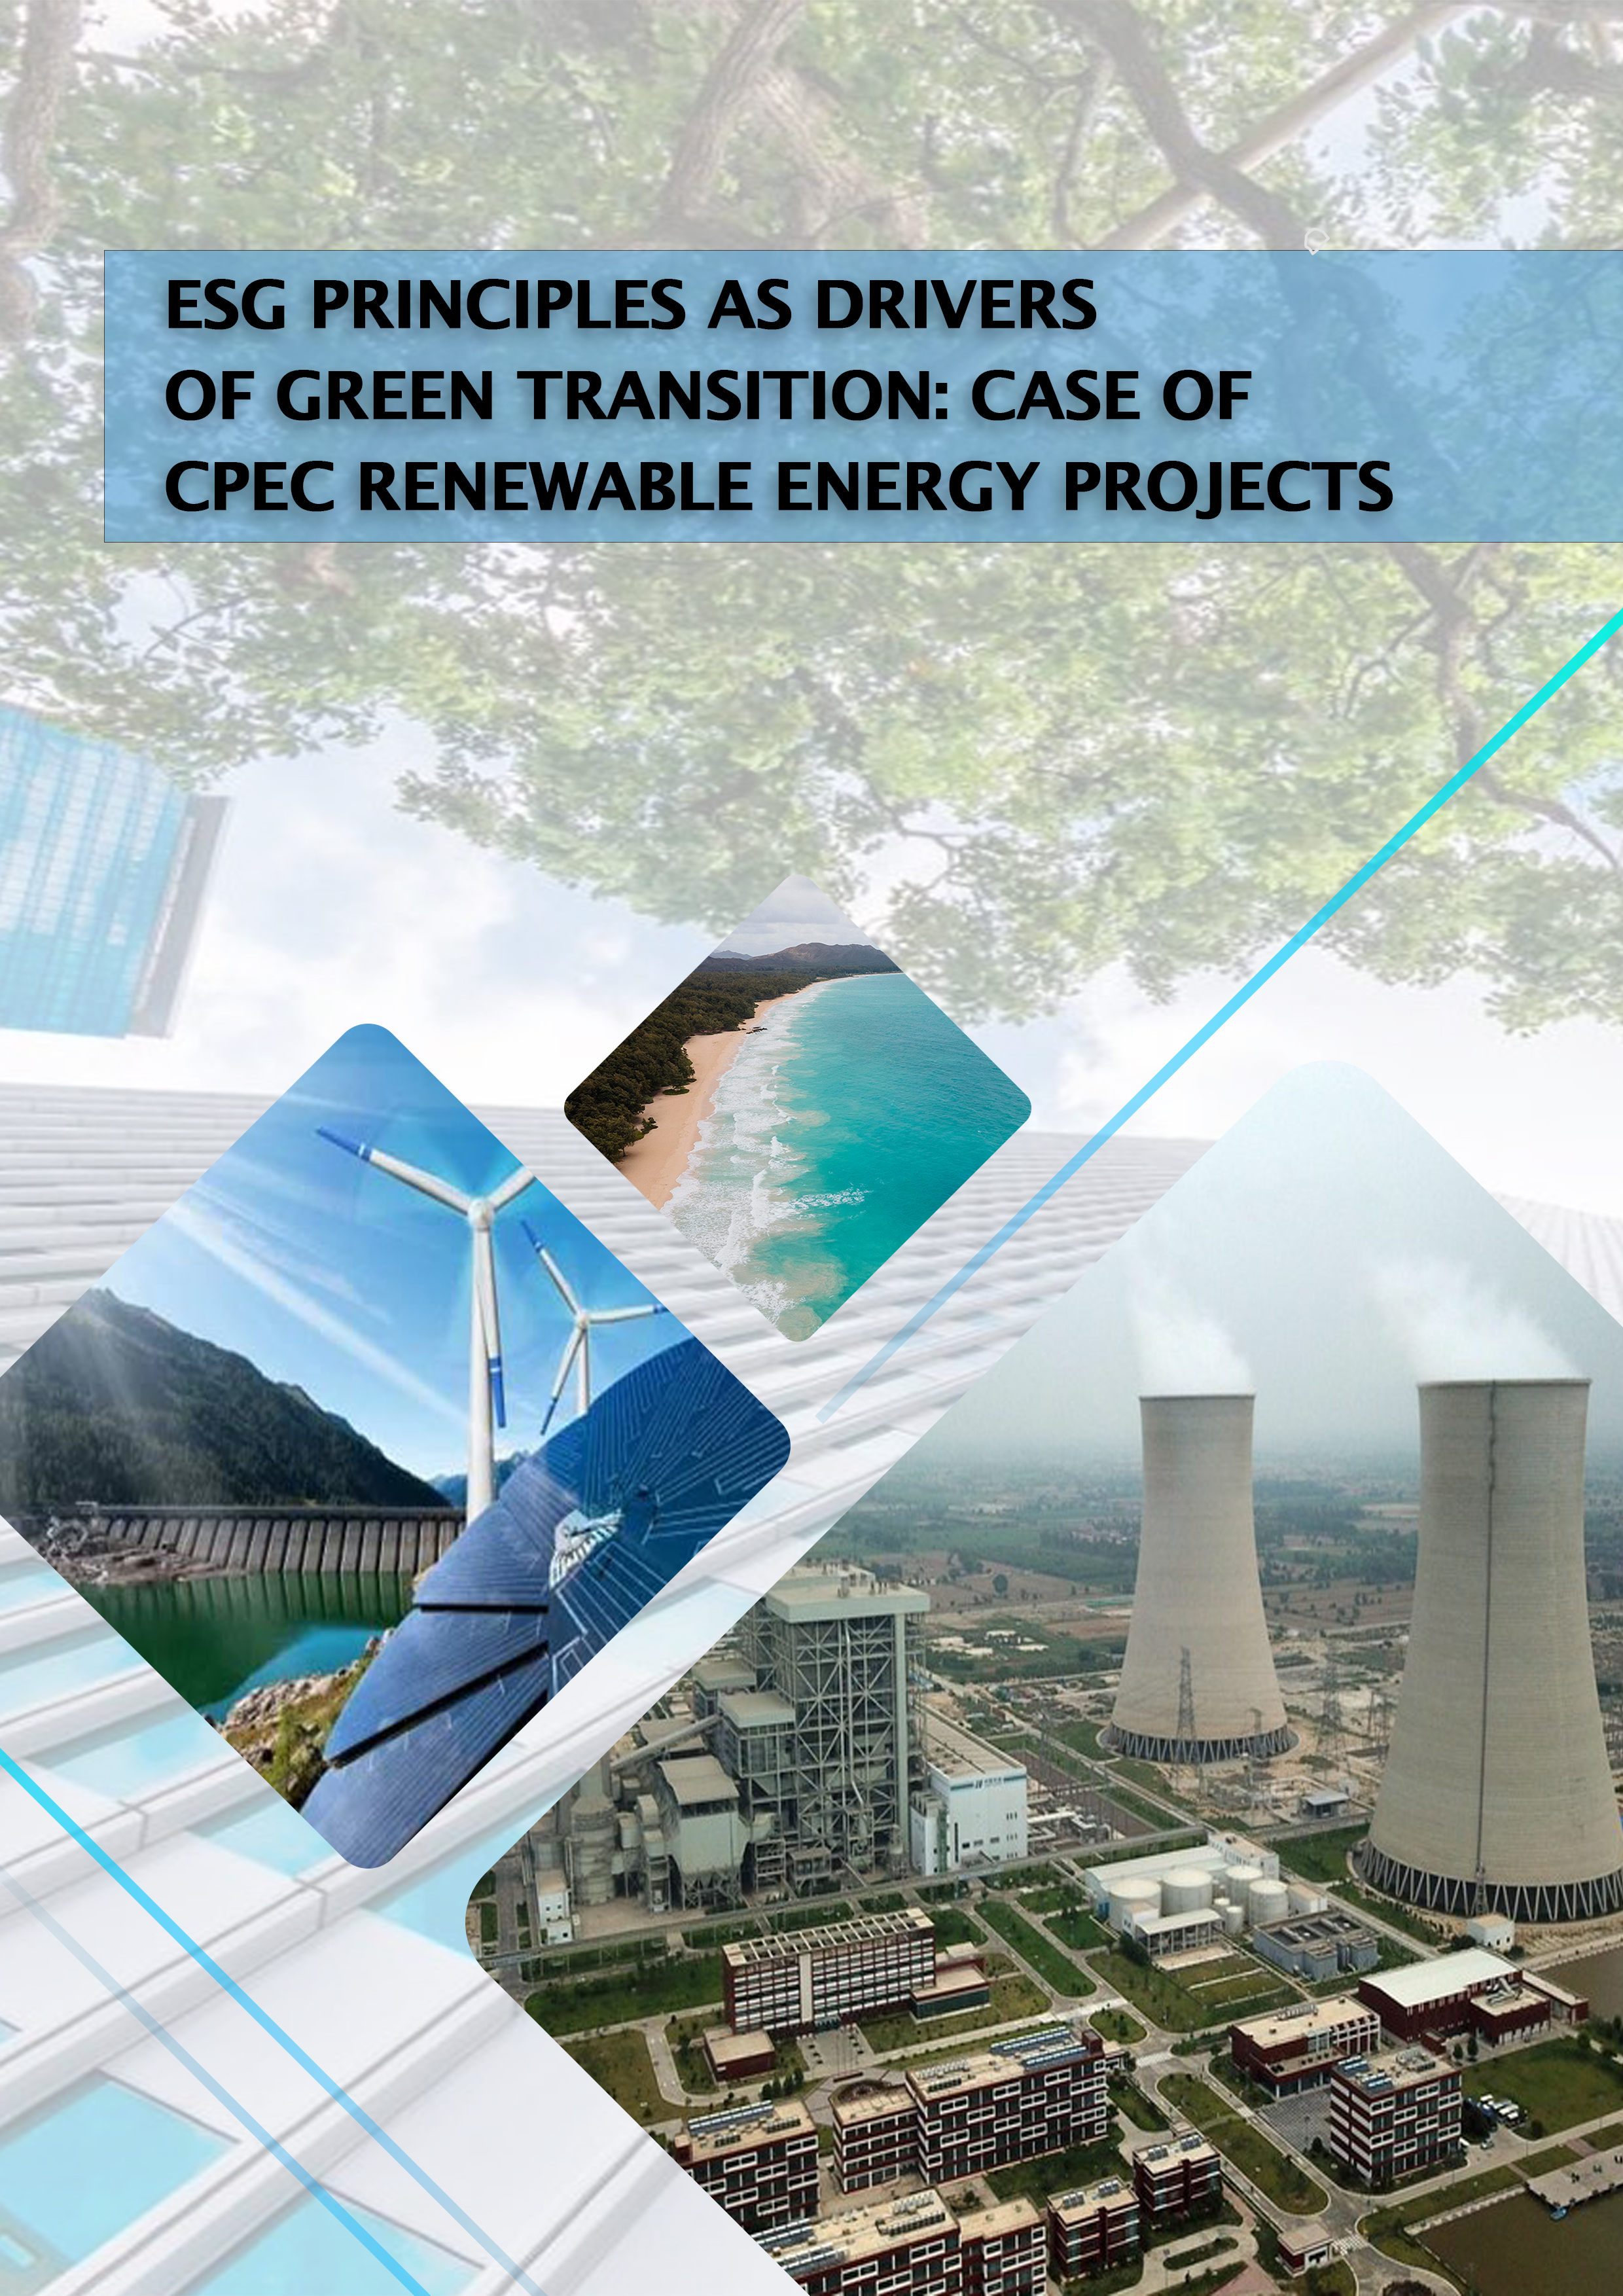 ESG Principles as Drivers of Green Transition: Case
of CPEC Renewable Energy Projects